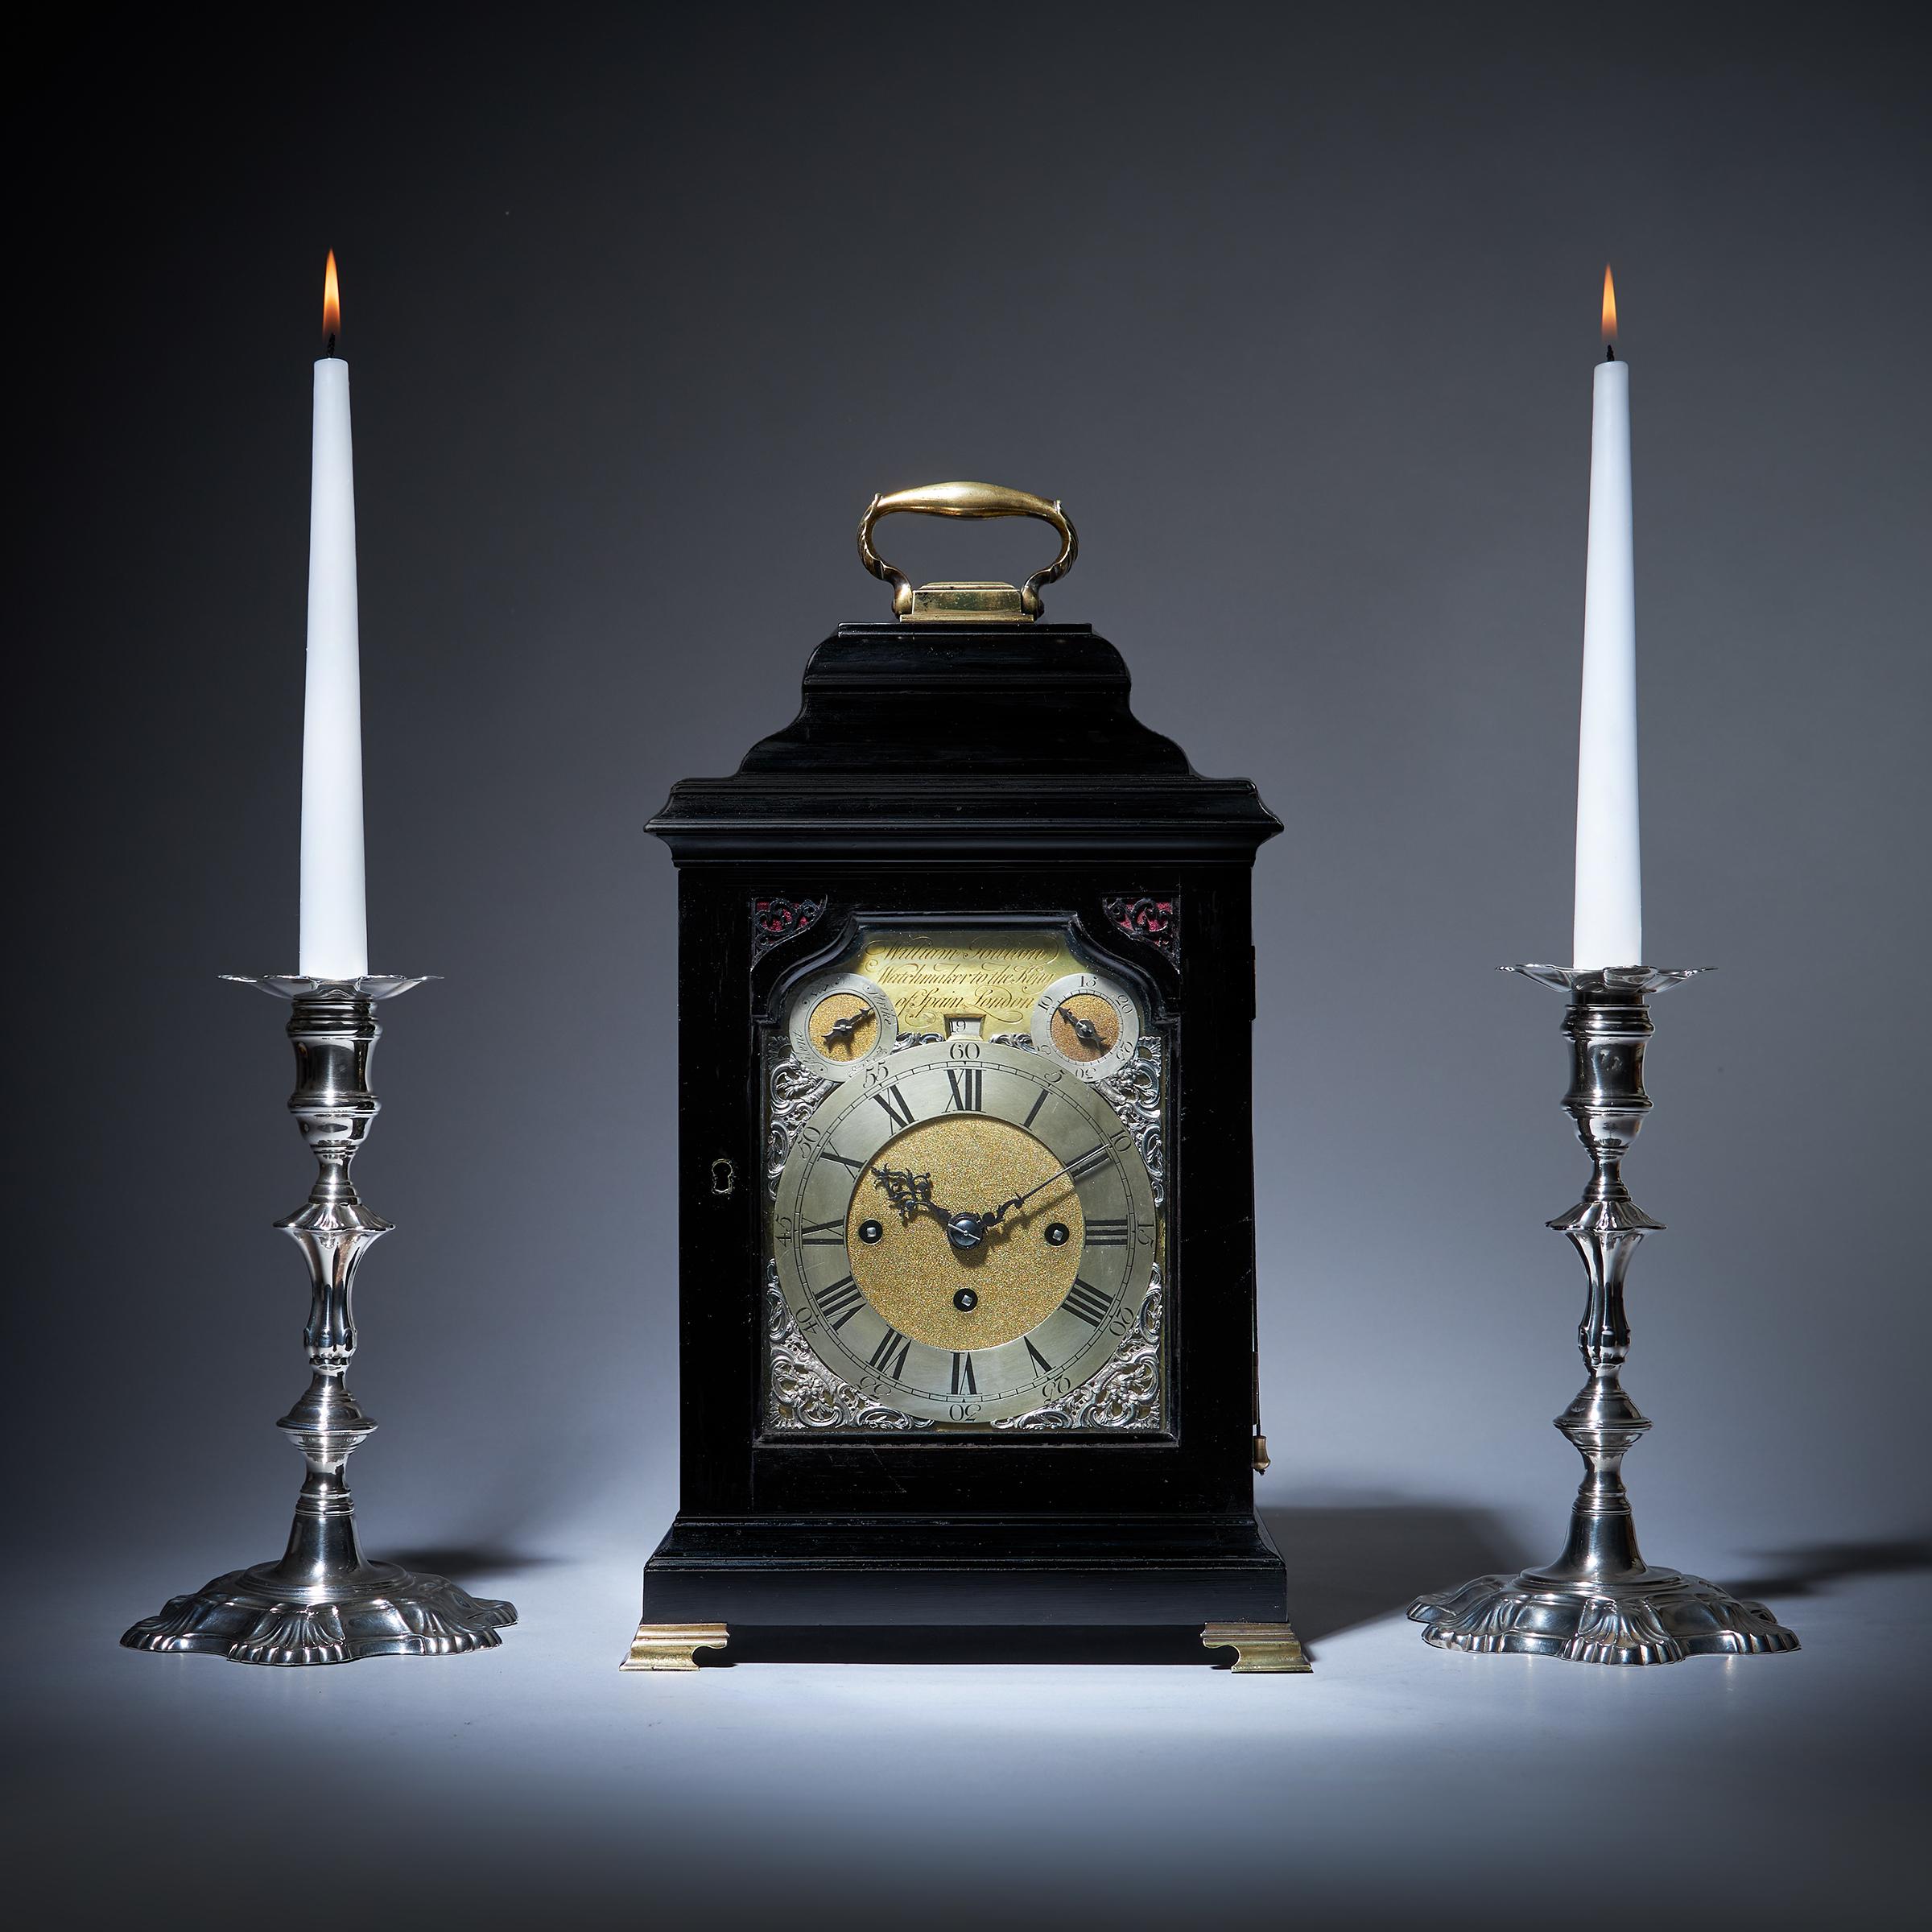 Rare 18th-Century Grande Sonnerie Striking table Clock by William Poulton For Sale 9